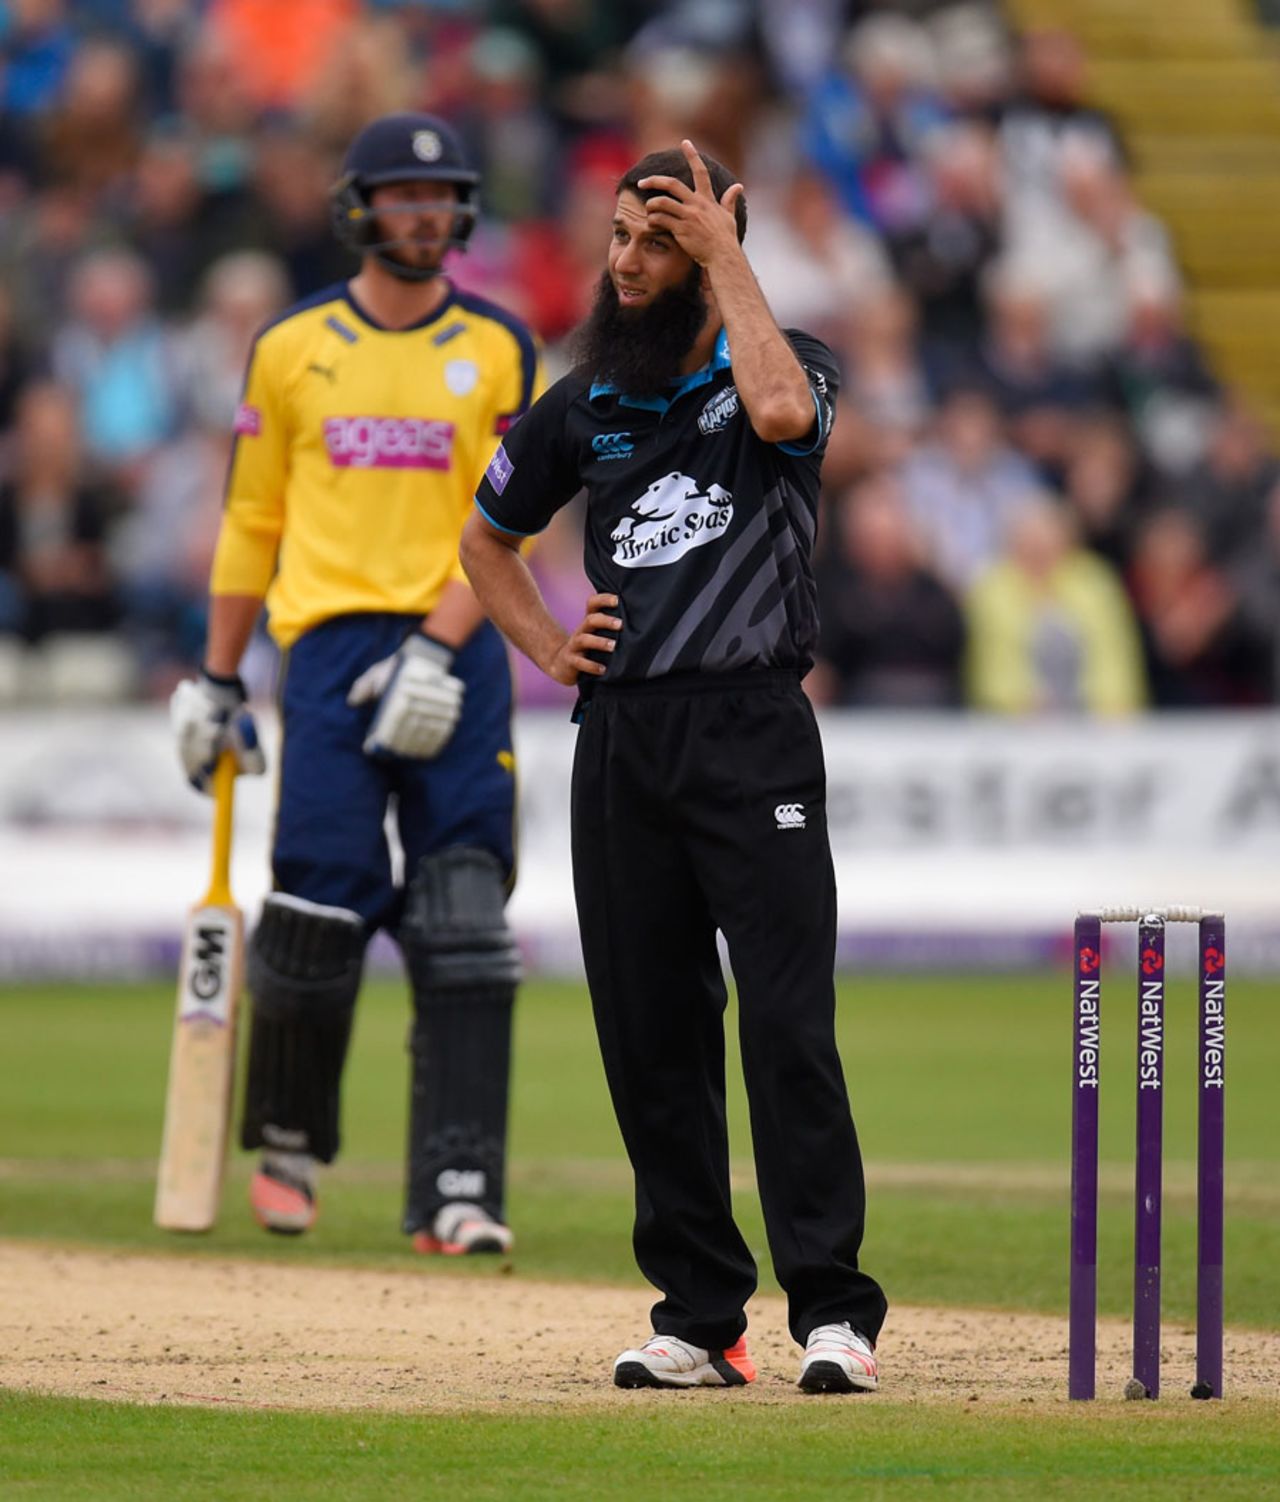 Worcestershire's bowlers were left scratching their heads, Worcestershire v Hampshire, NatWest T20 Blast quarter-final, New Road, August 14, 2015